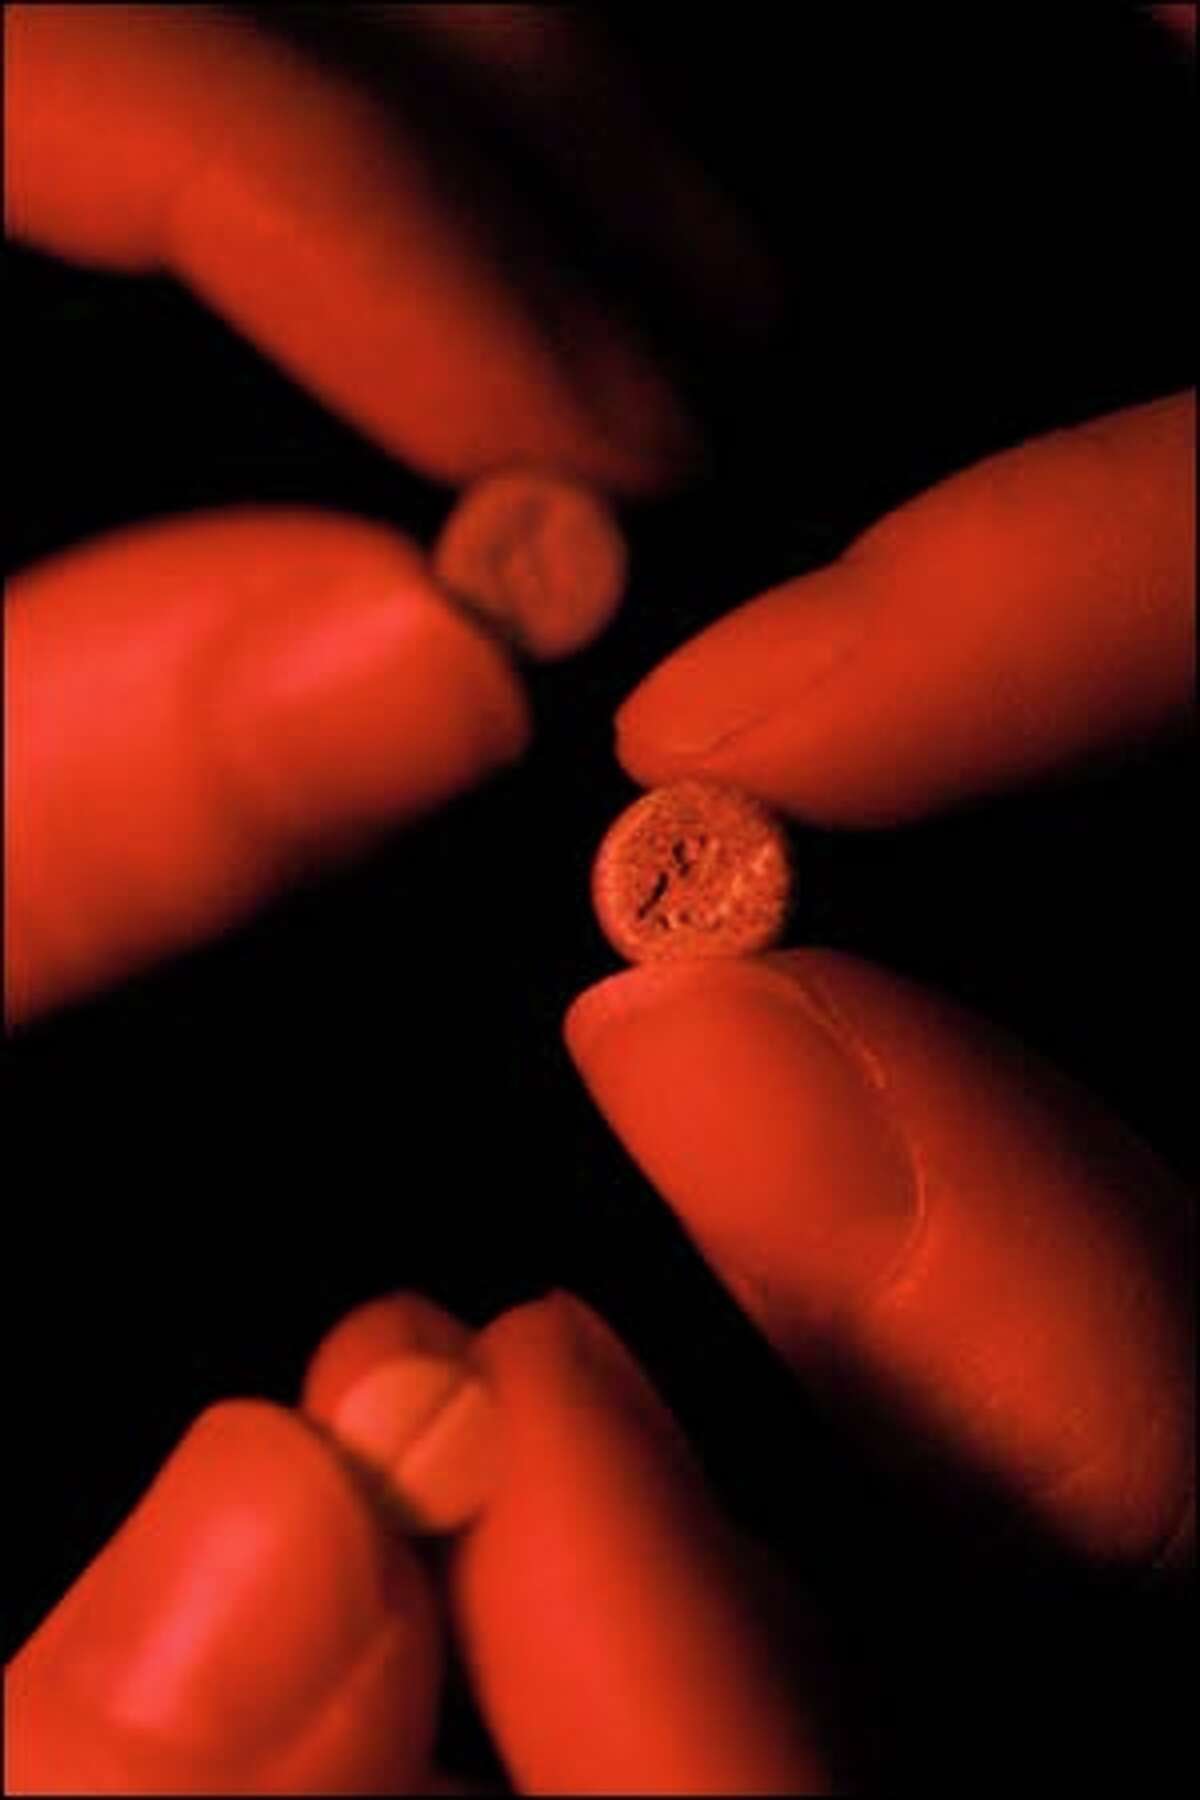 Ecstasy is popping up in the hands of a wide range of people in Seattle, not just "ravers."